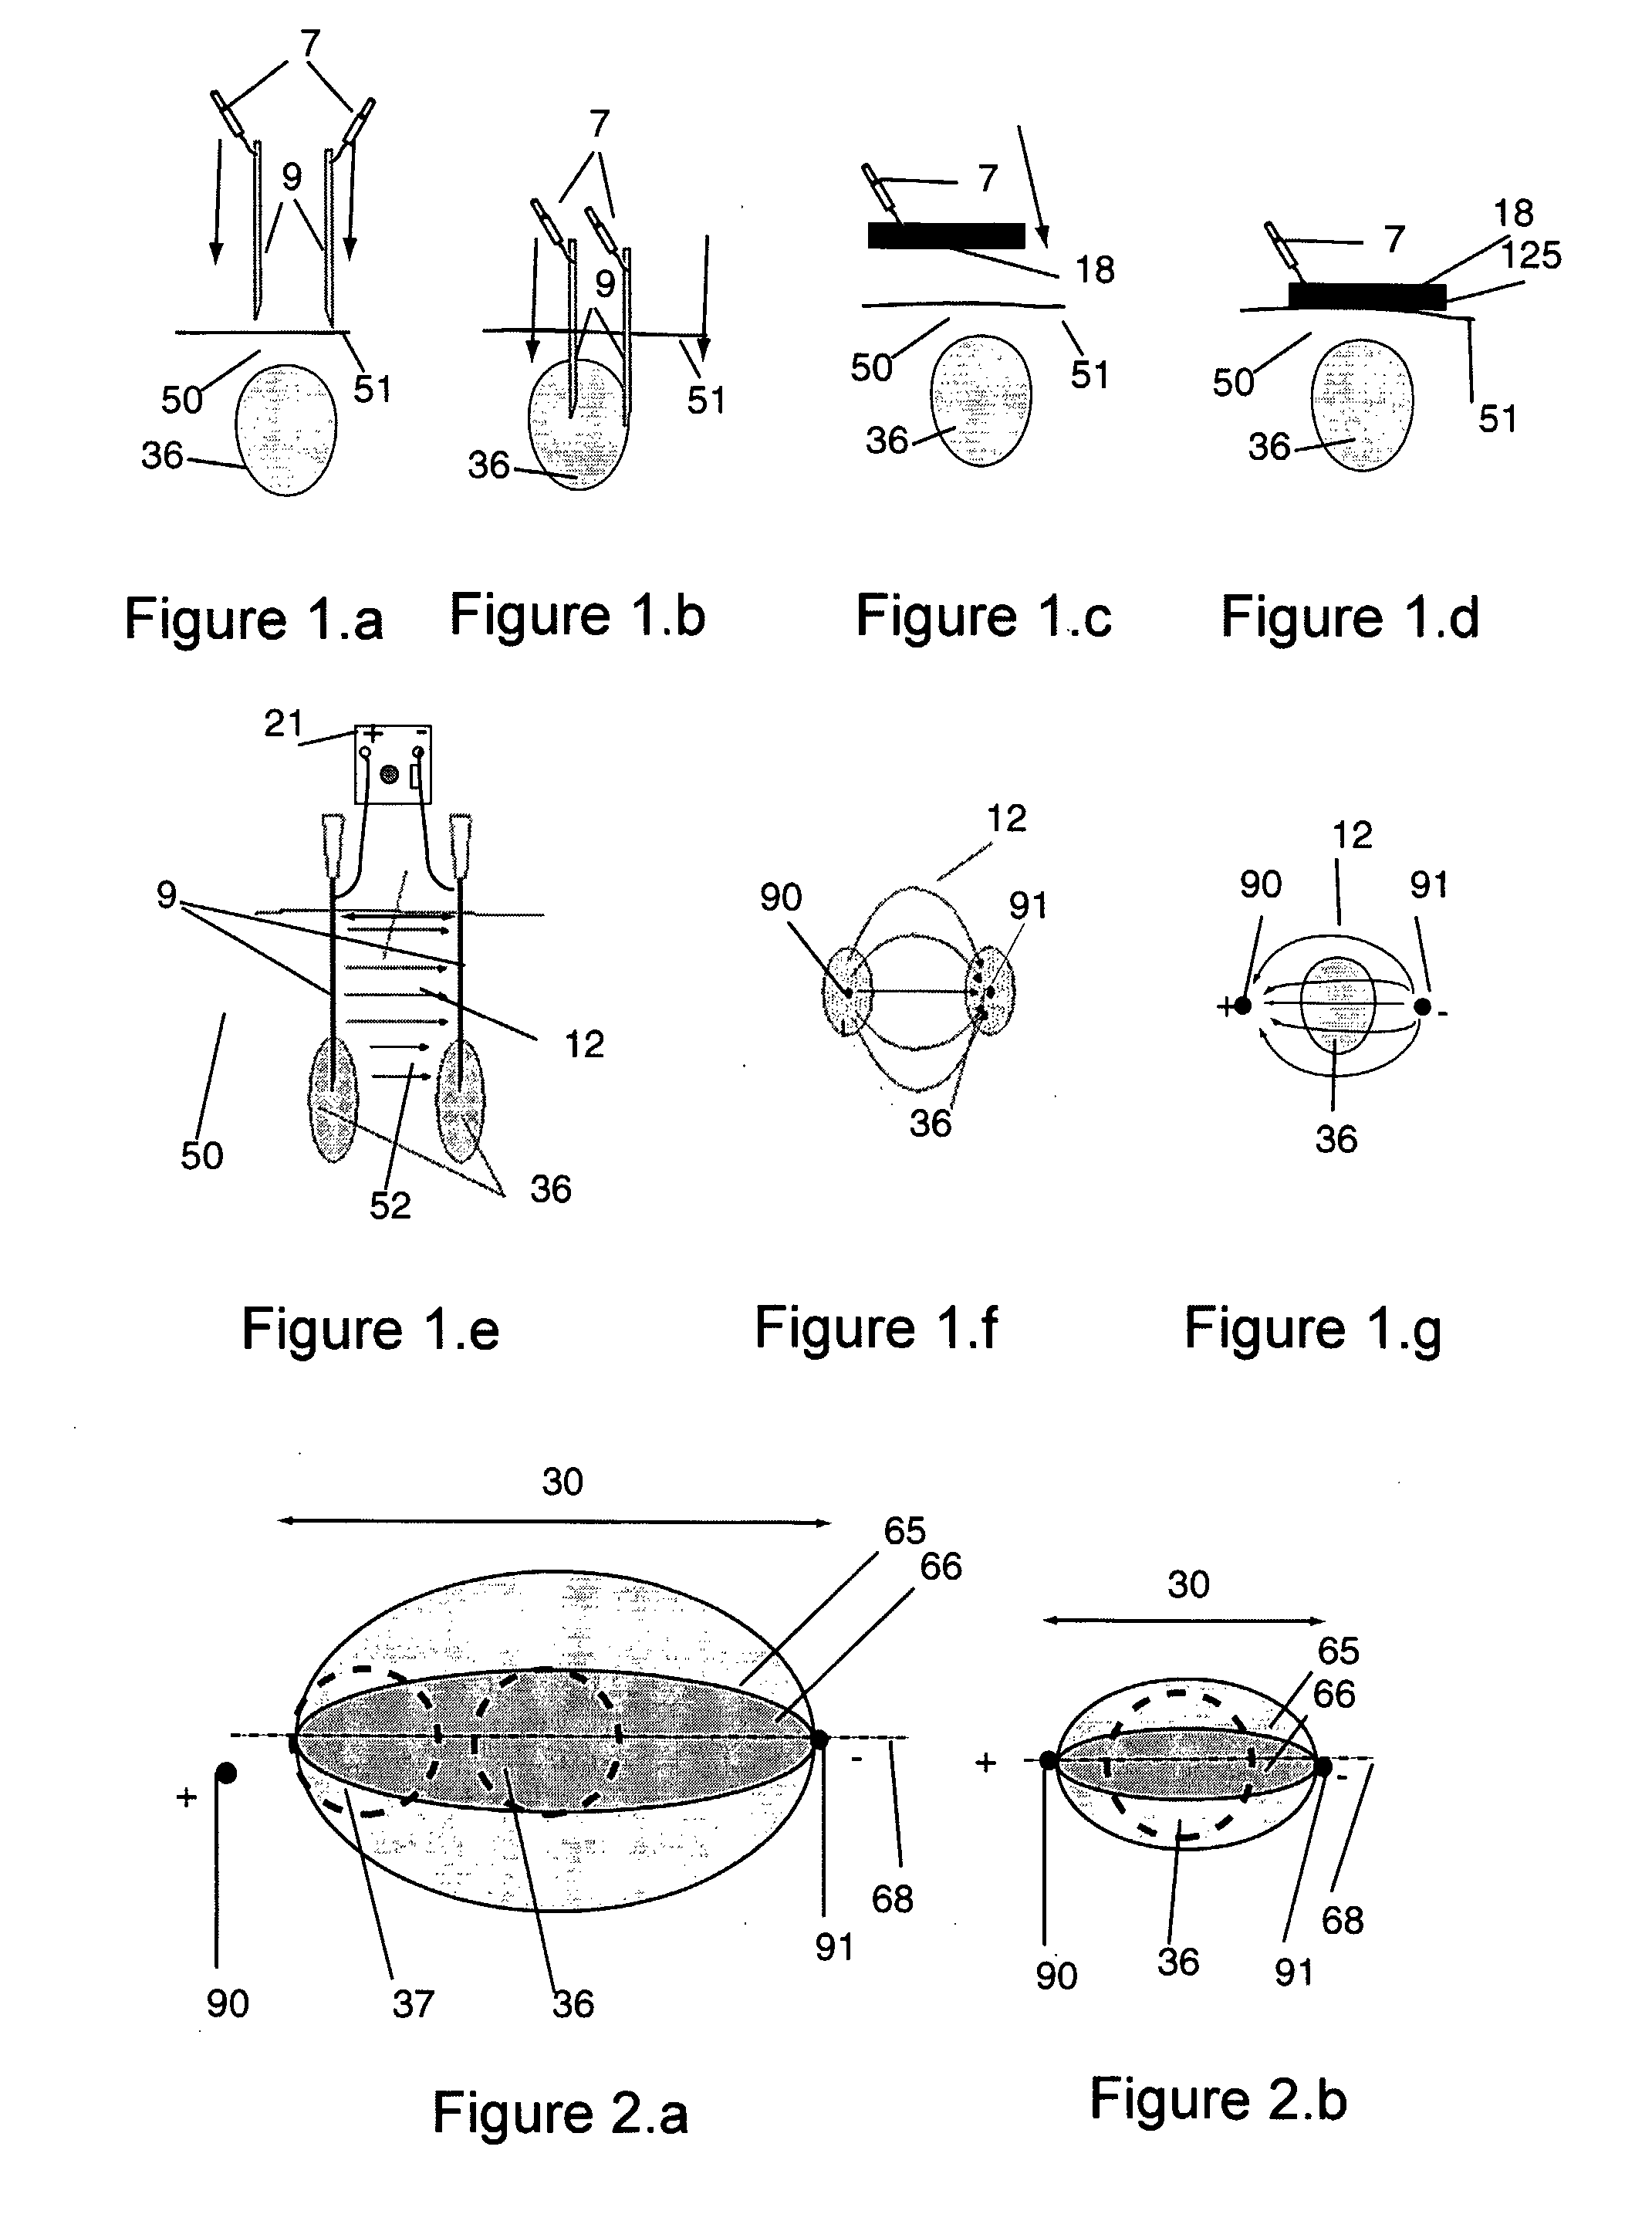 Device for transferring molecules to cells using an electric force